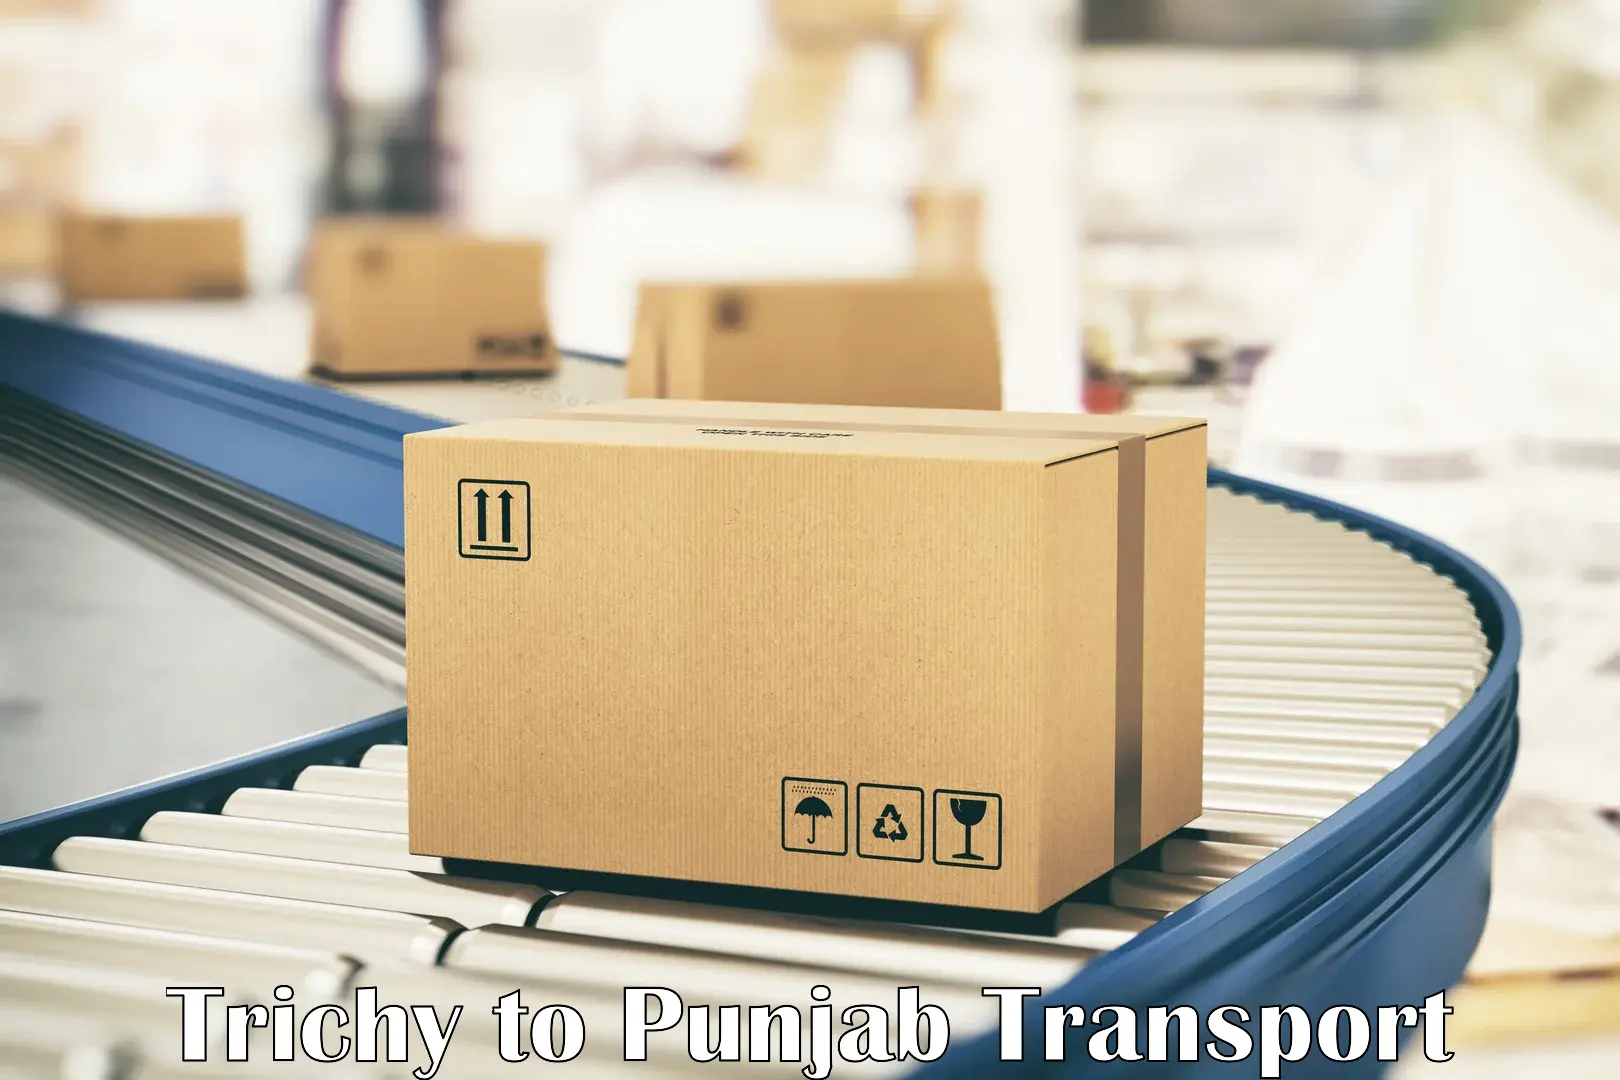 Nationwide transport services Trichy to Patiala